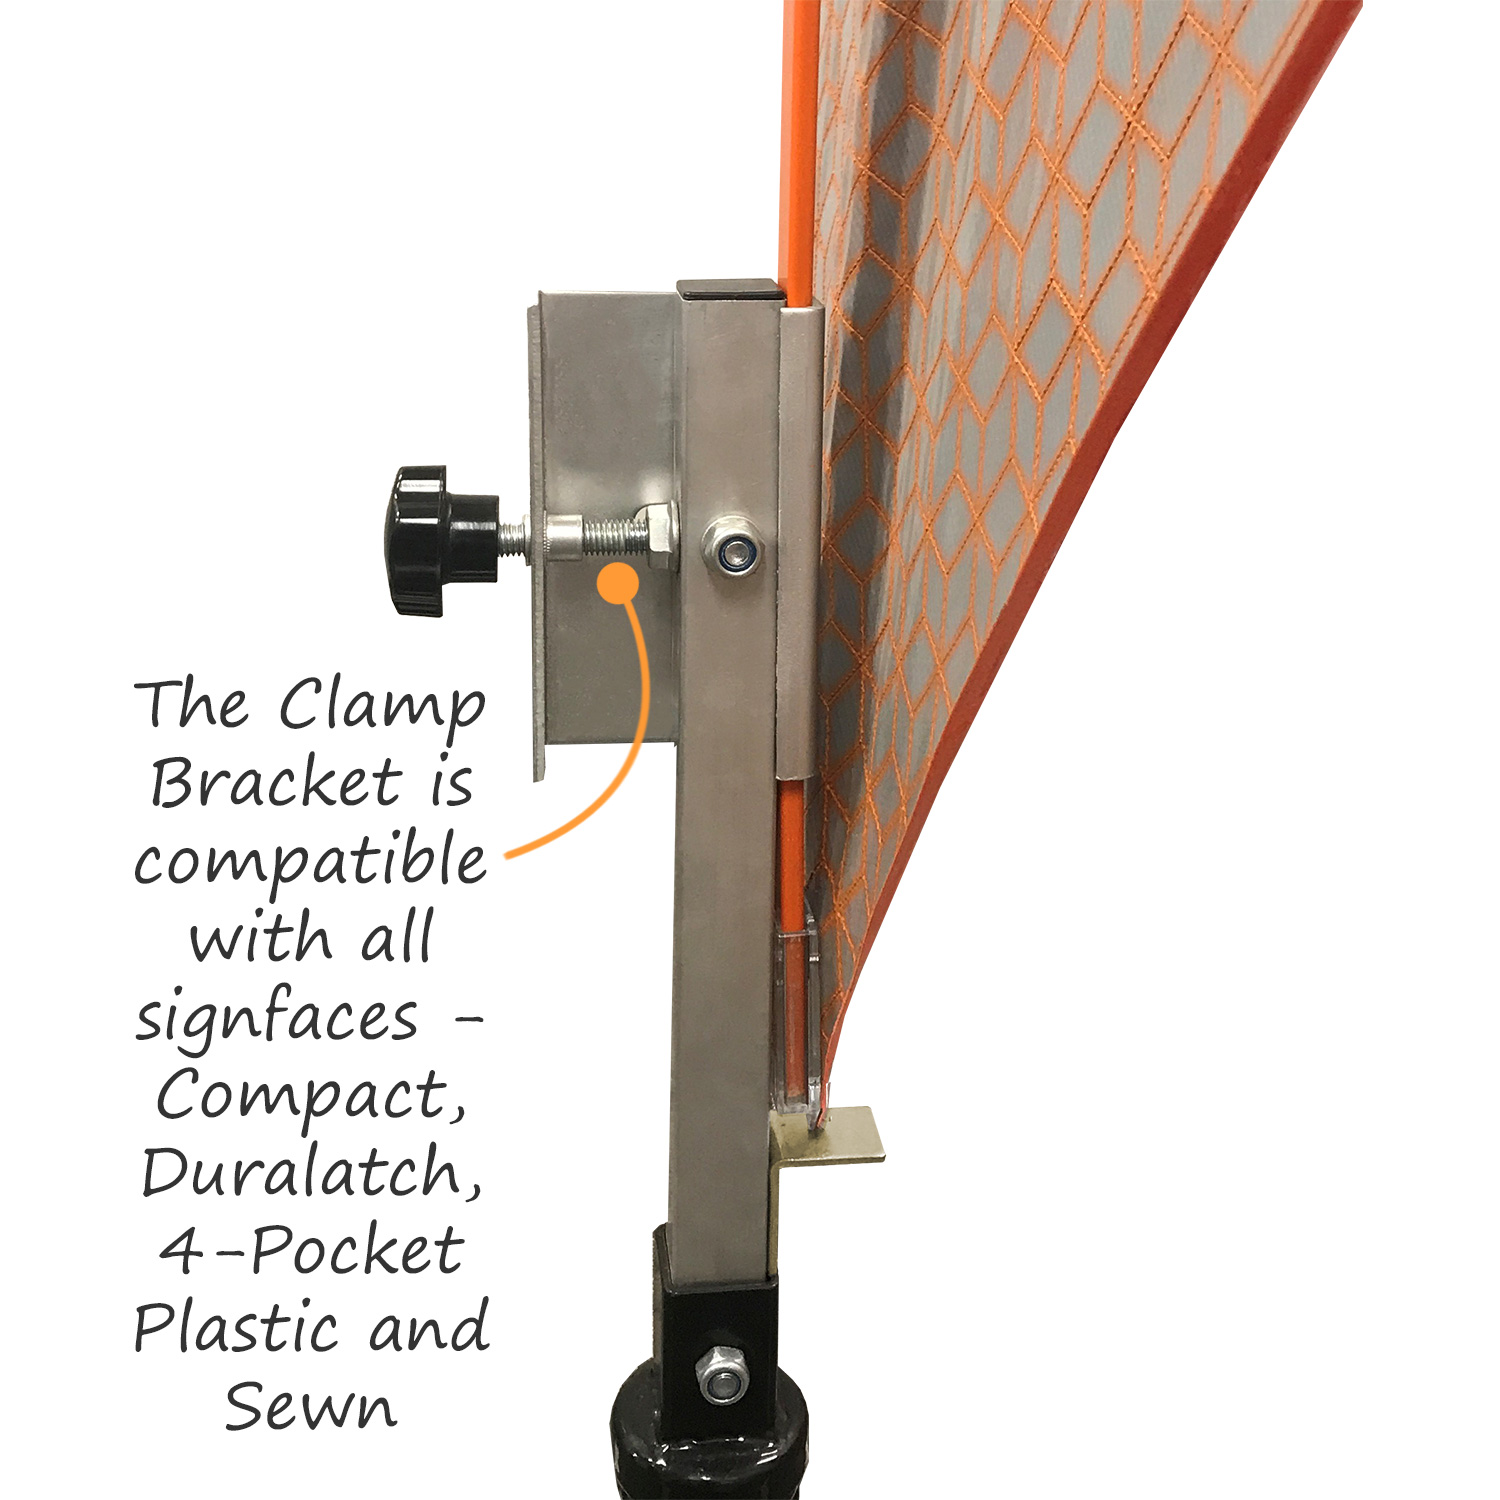 Easy to Use Clamp Lock!